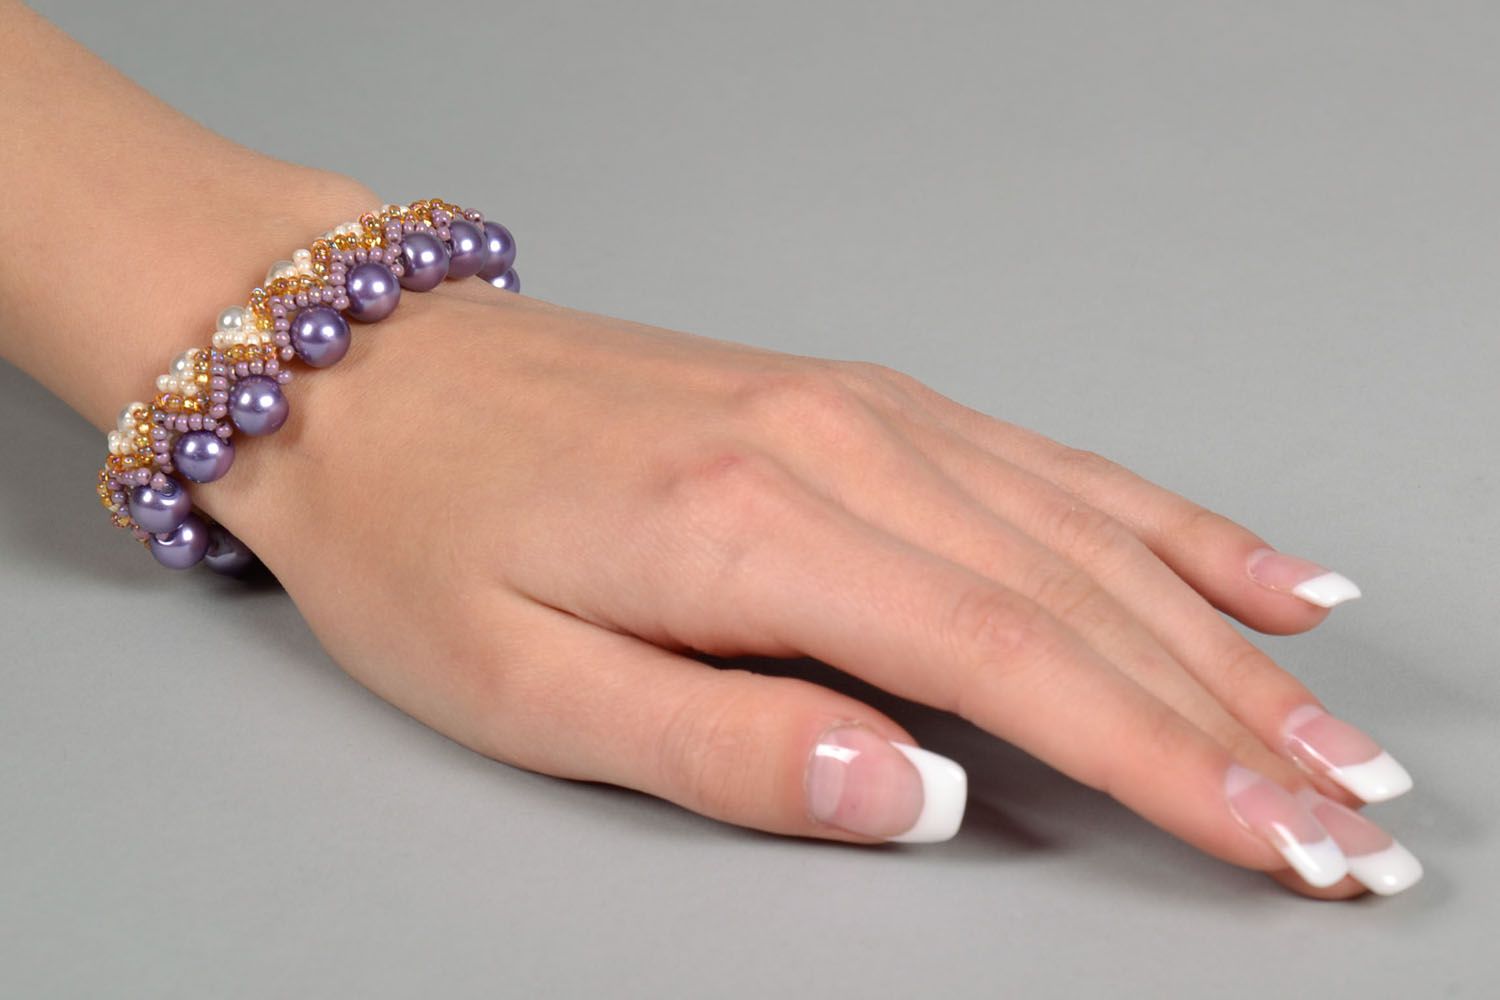 Bracelet made of beads and artificial pearls photo 5